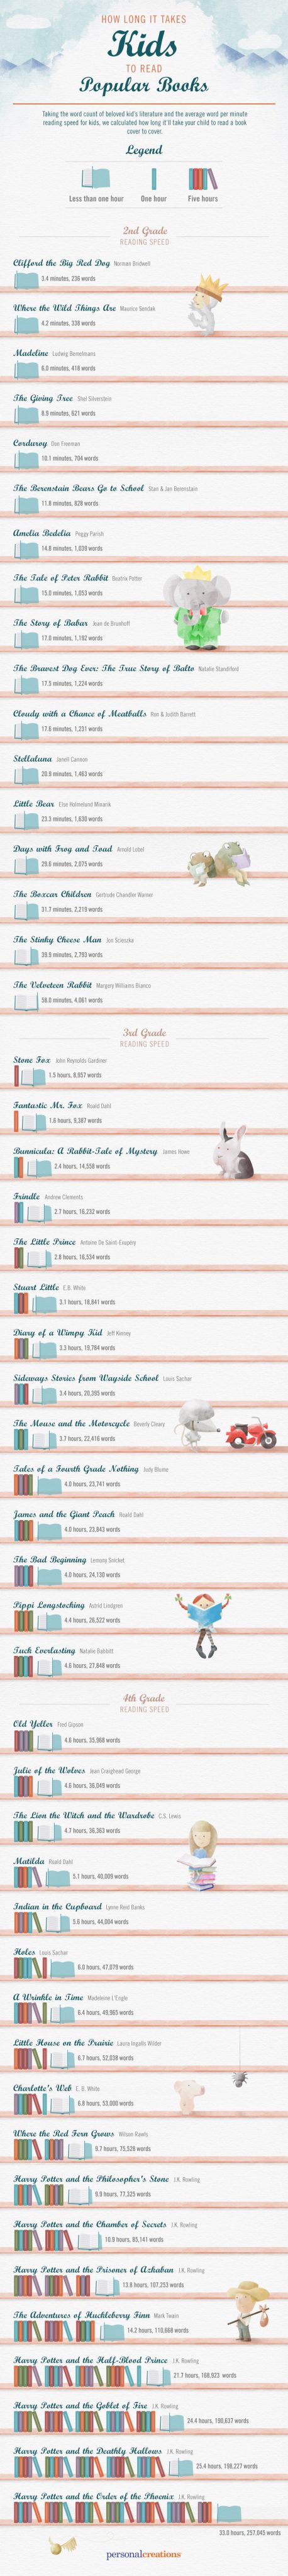 How-Long-It-Takes-kids-to-read